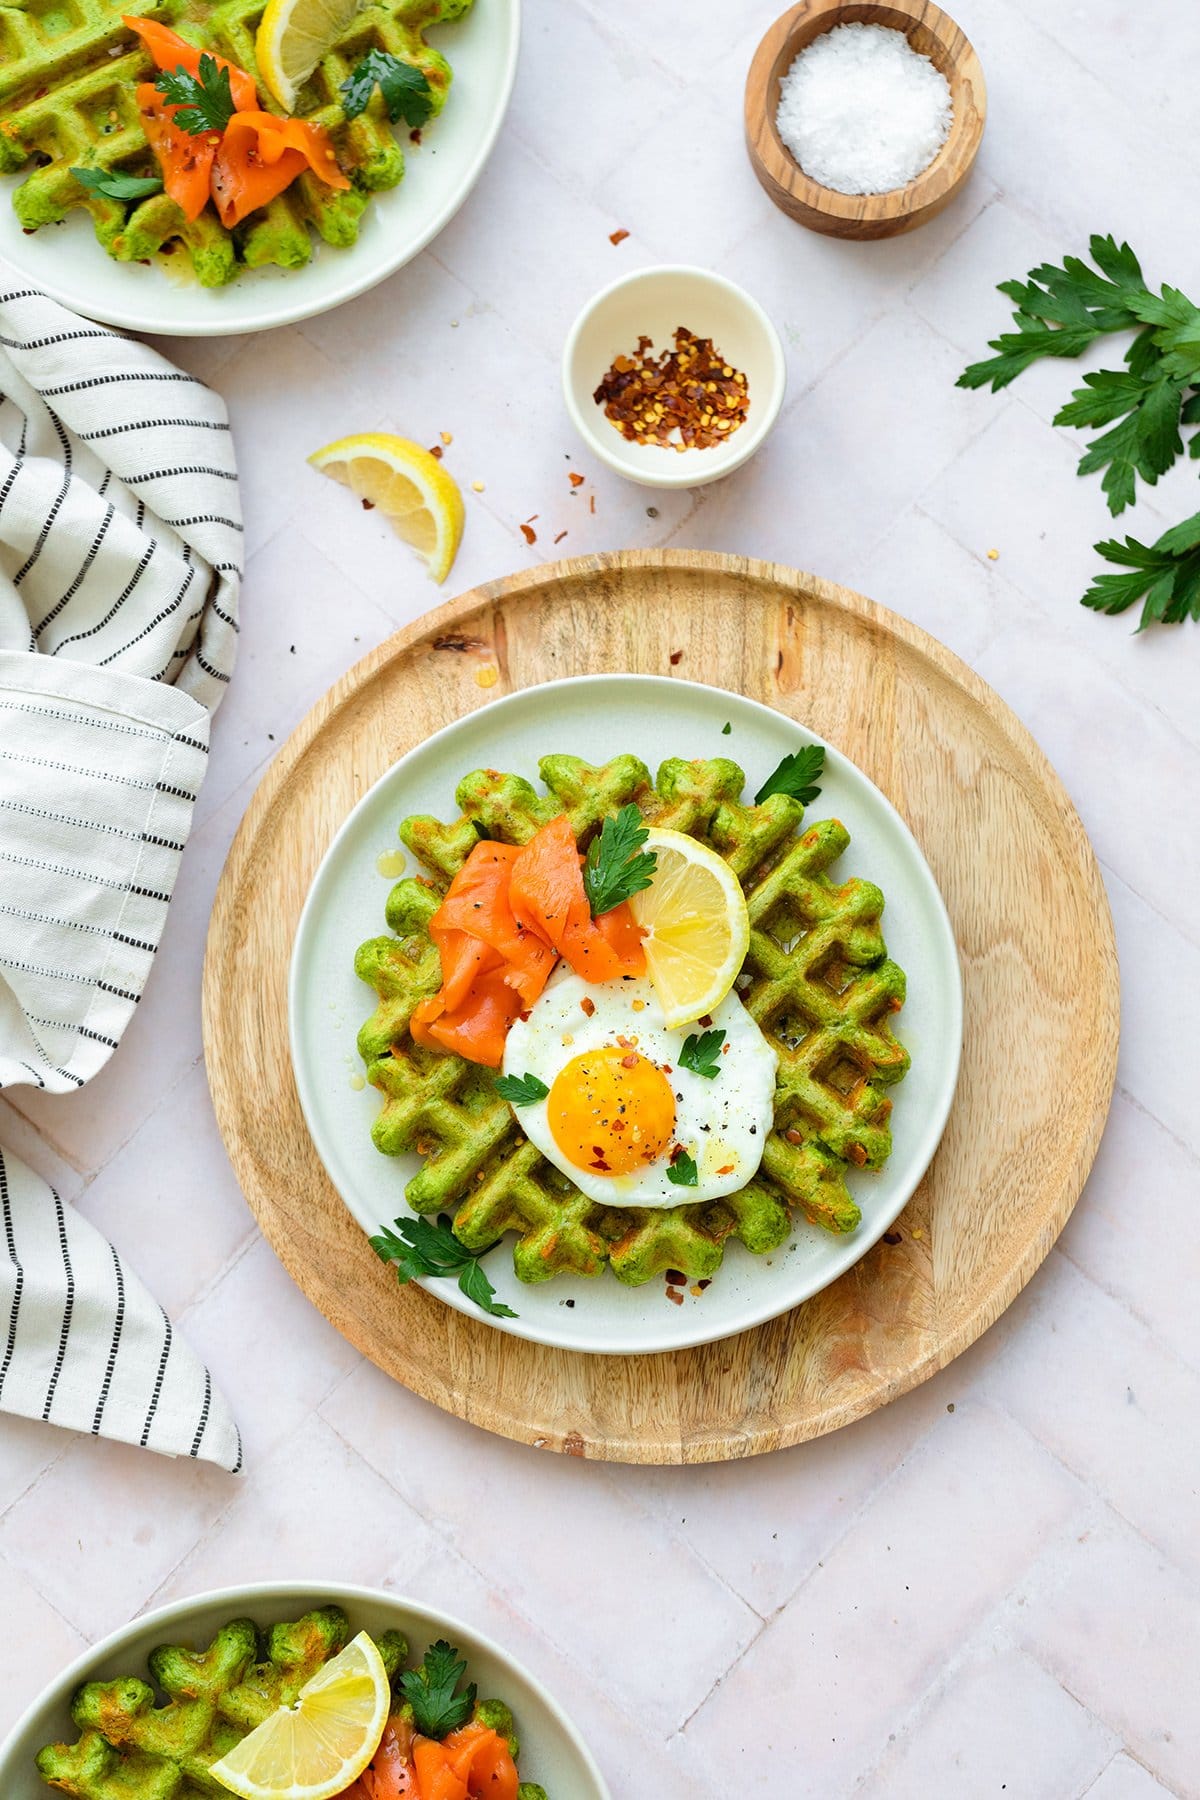 Green waffles on a white plate topped with a sunny side up egg, smoked salmon, fresh parsley, and a wedge of lemon.